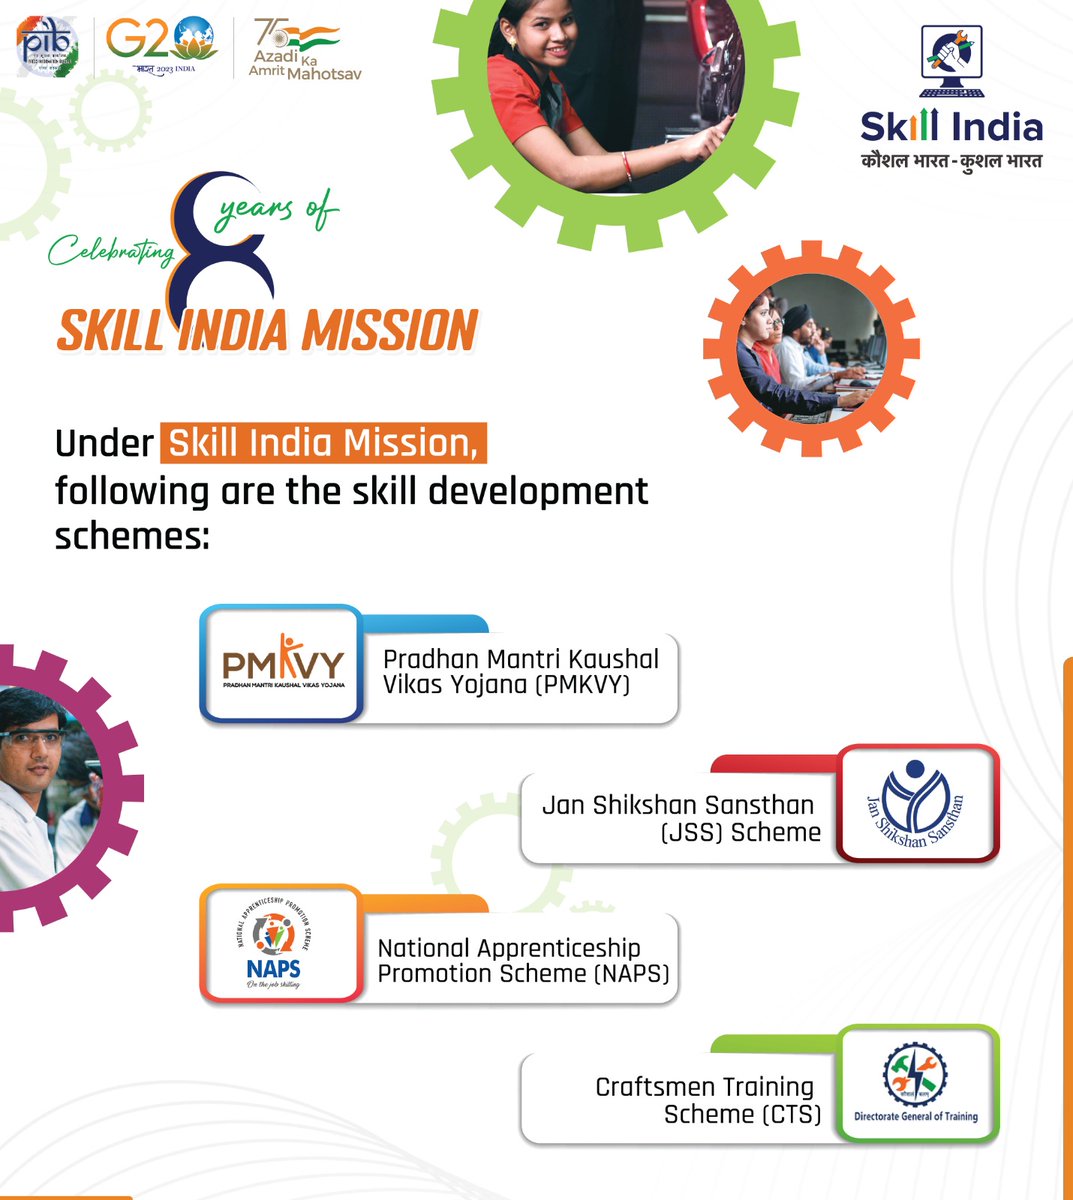 #SkillIndiaMission completes 8 successful years on #WorldYouthSkillsDay! 

▪️ Under Skill India Mission, the Ministry of Skill Development and Entrepreneurship is delivering skills through a comprehensive network of skill development centres

▪️ The objective of the mission is to…